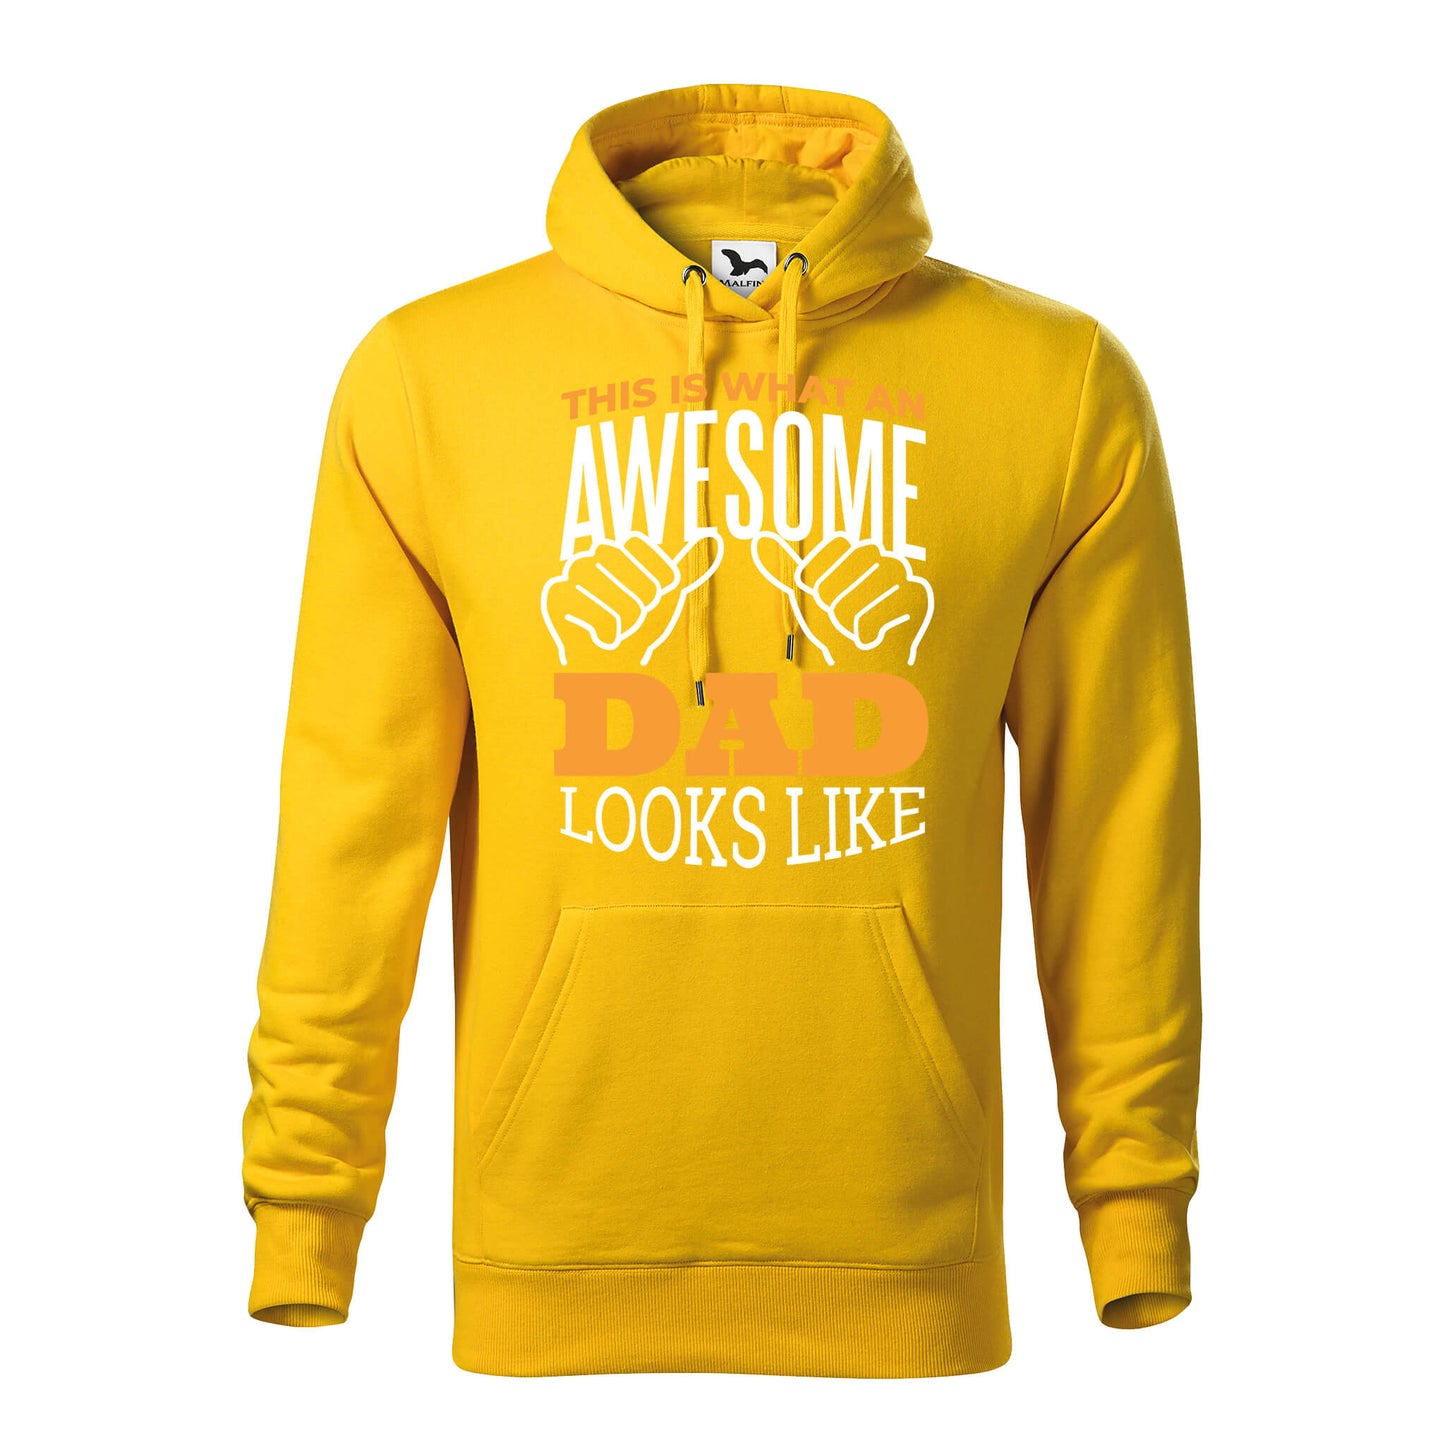 This is what an awesome dad looks like hoodie - rvdesignprint